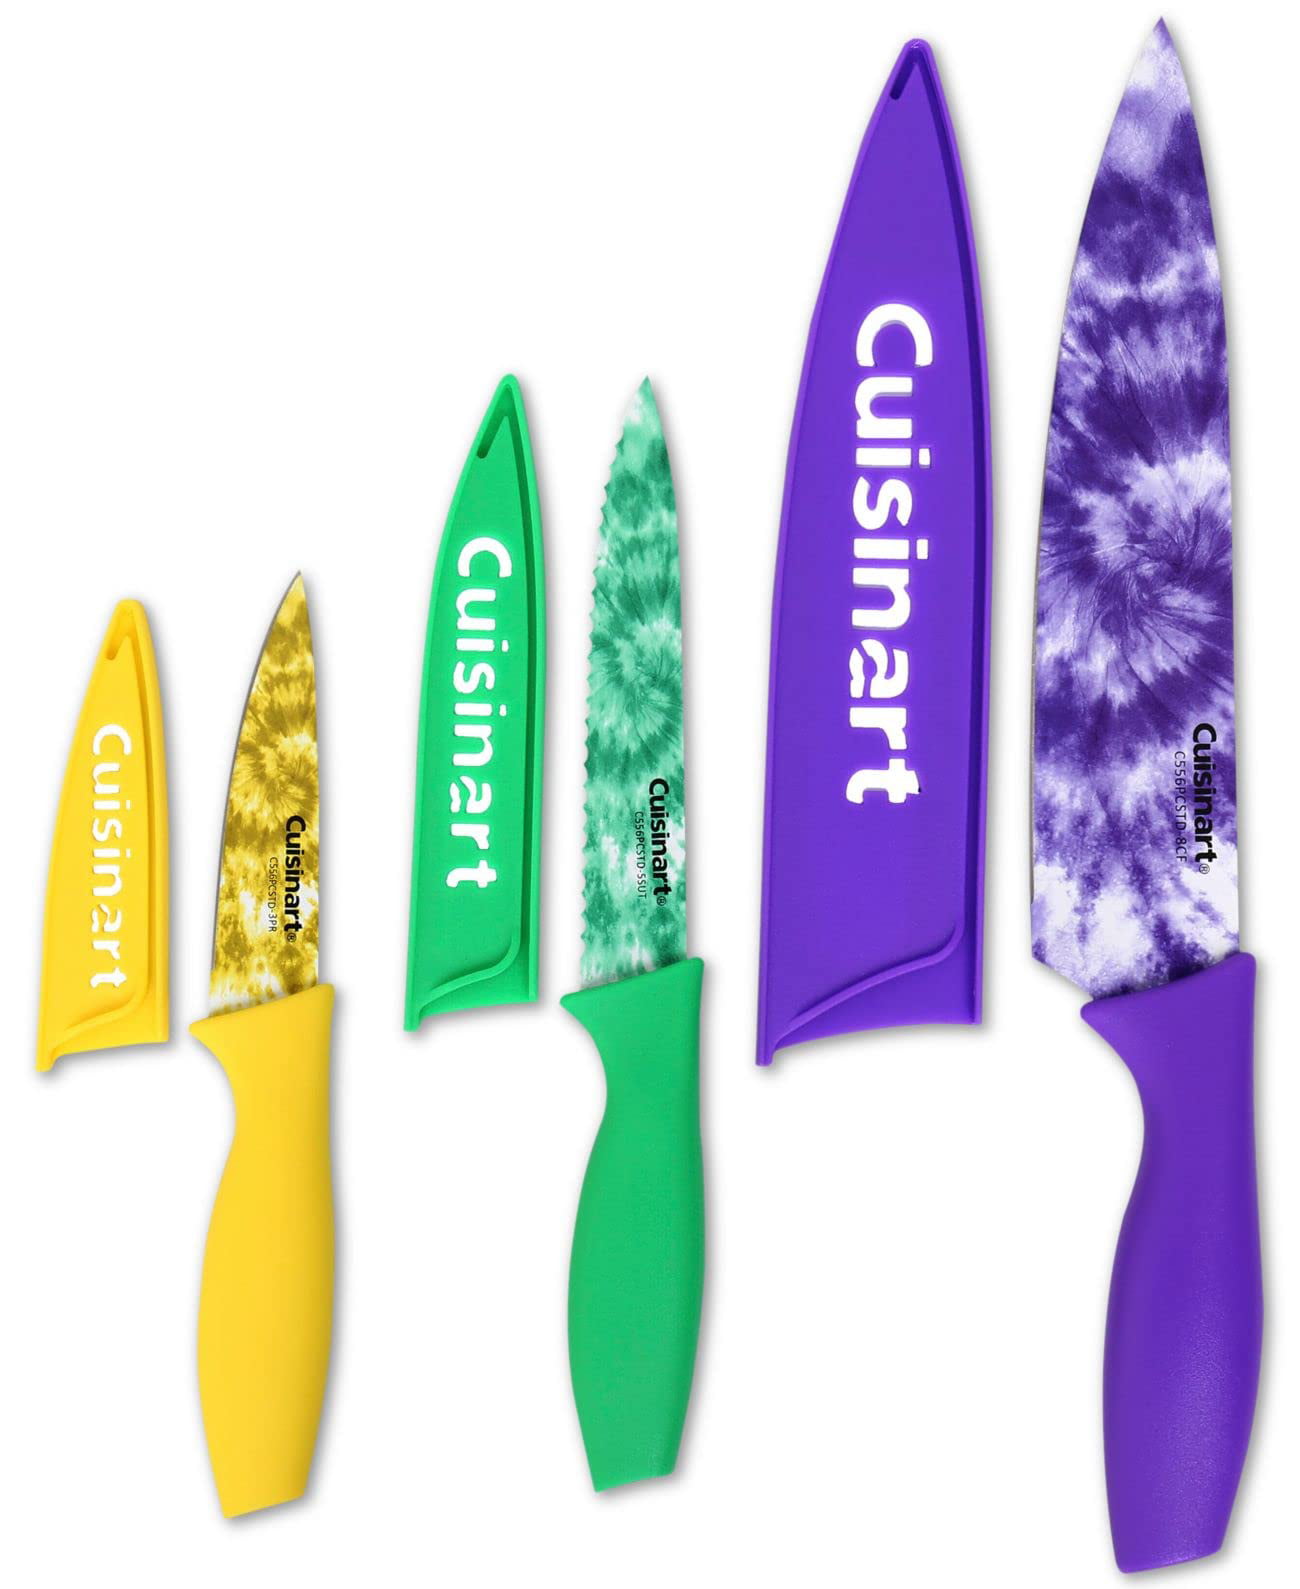 Color Coded Knives - Chefs Knives from Remington Steel Arts